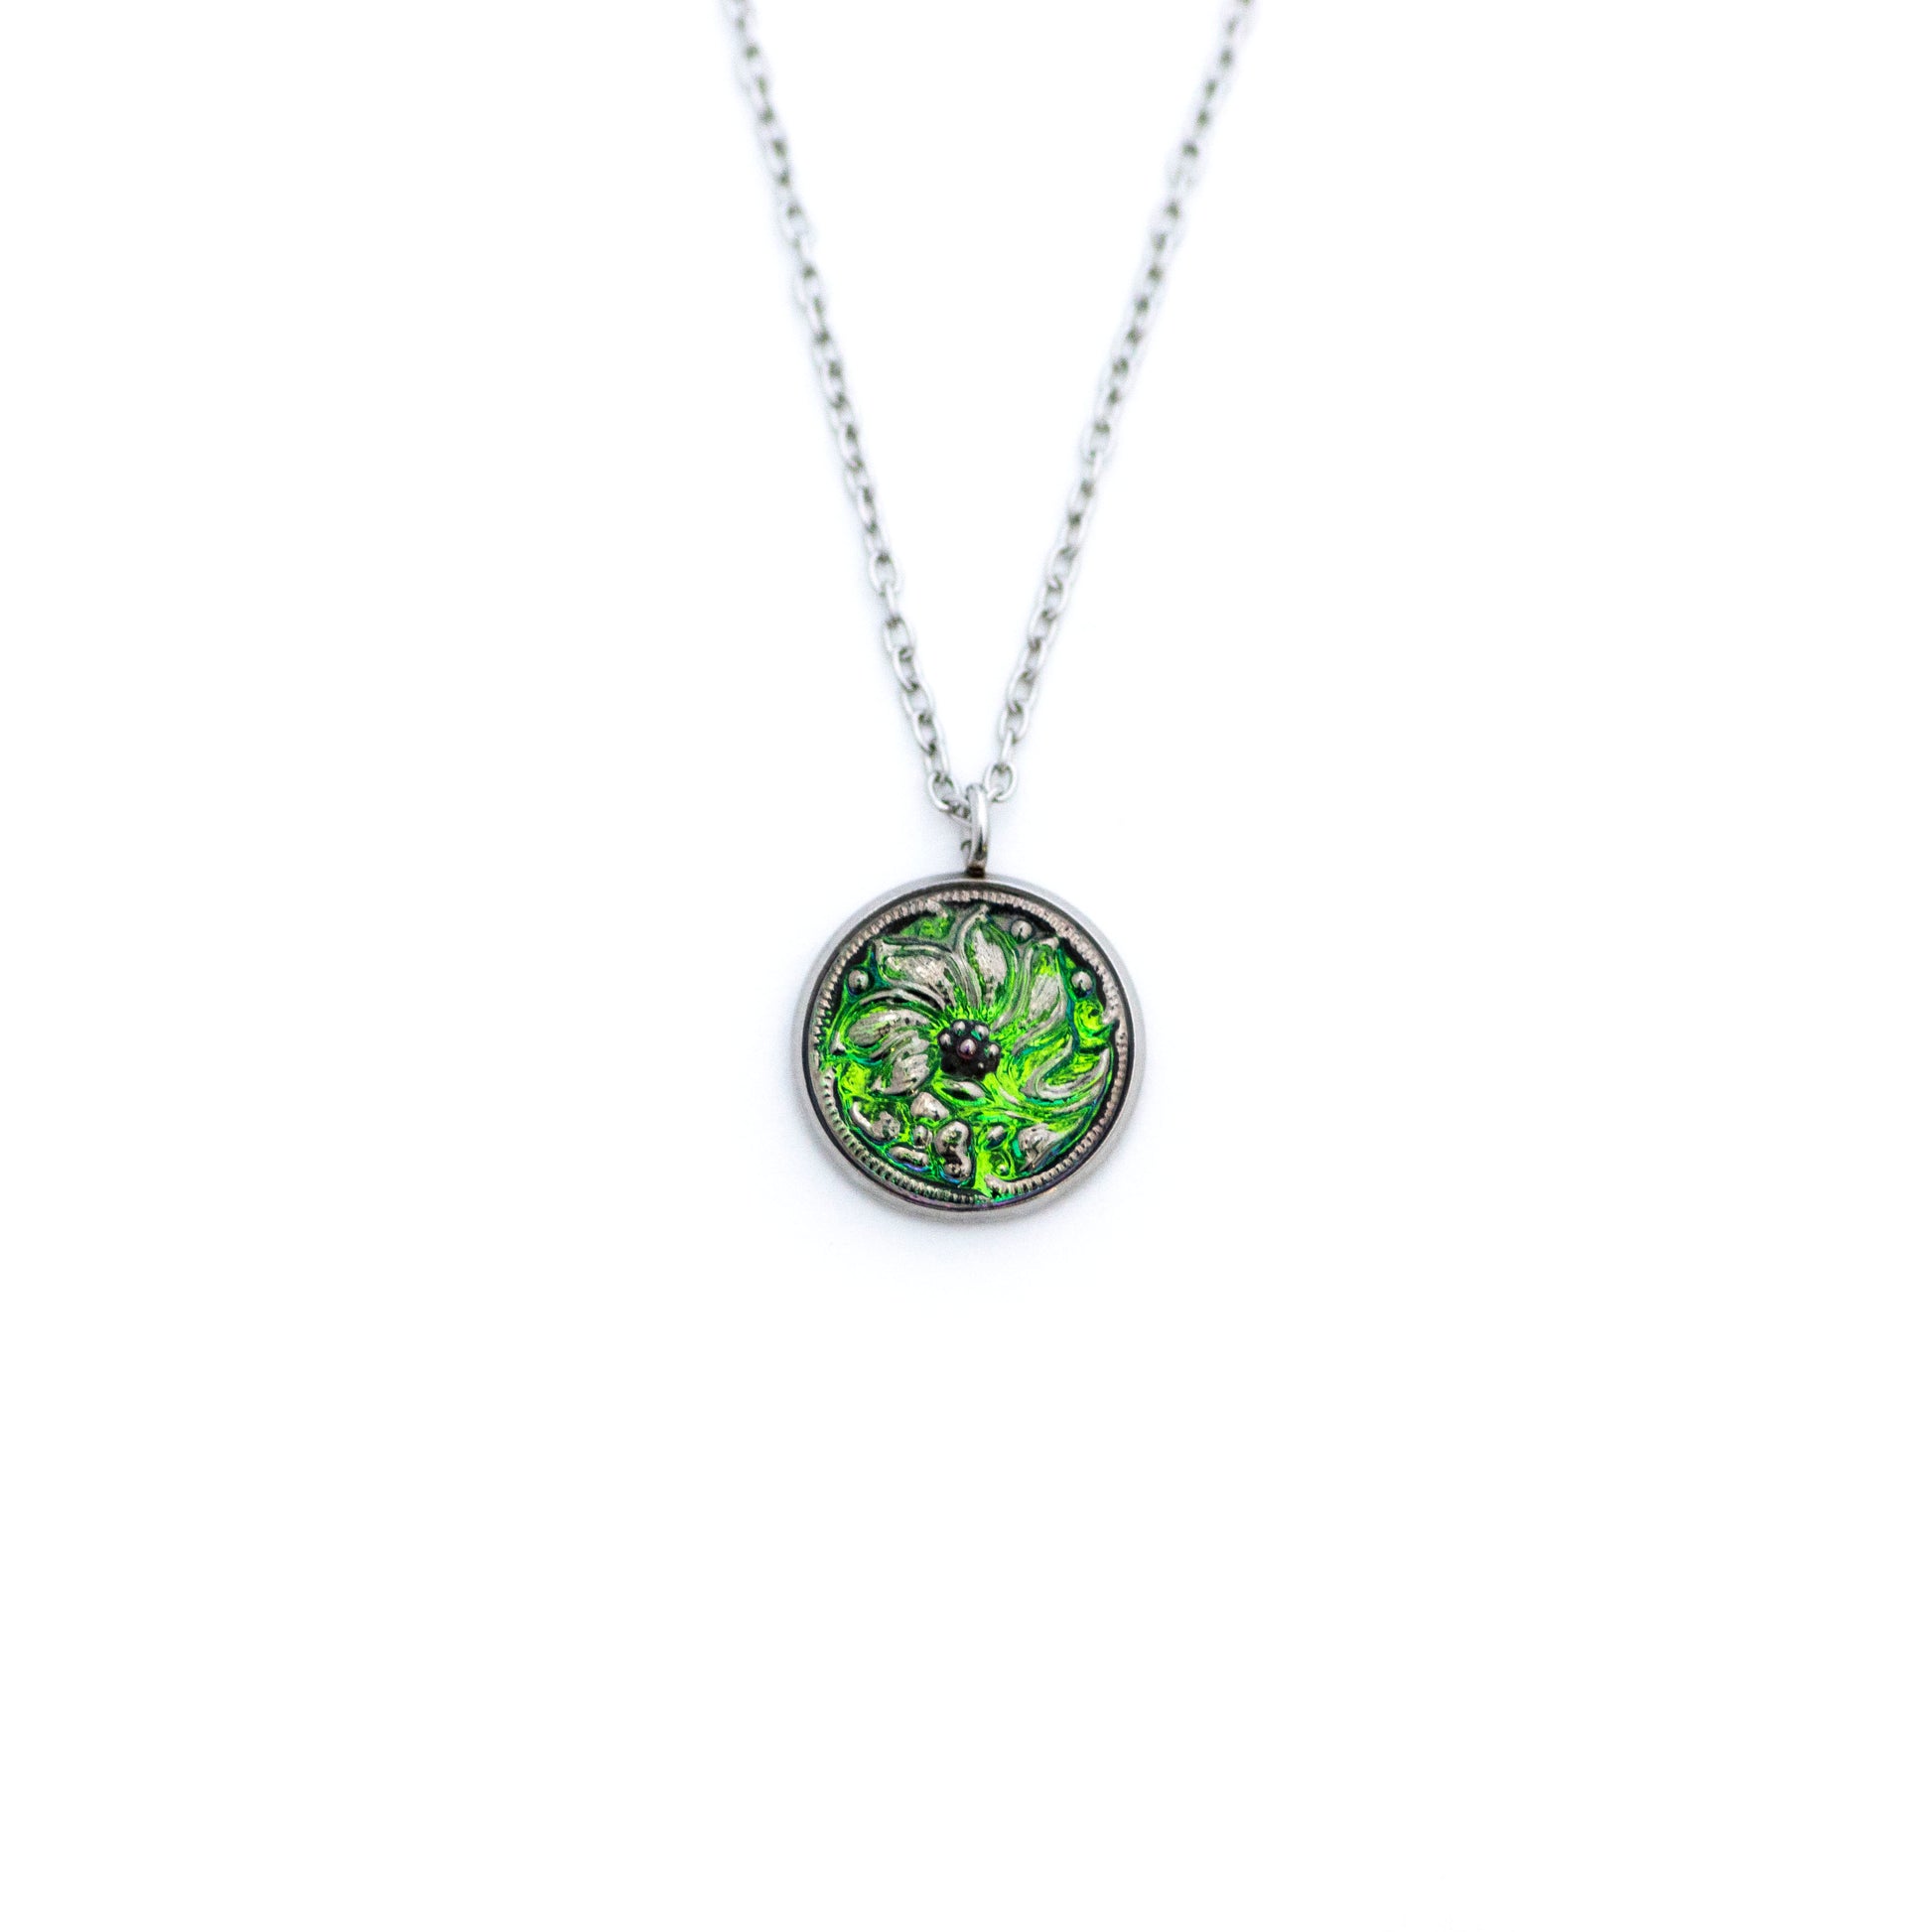 Green and silver platinum painted Czech glass button with lily lotus flower. Button pendant necklace.